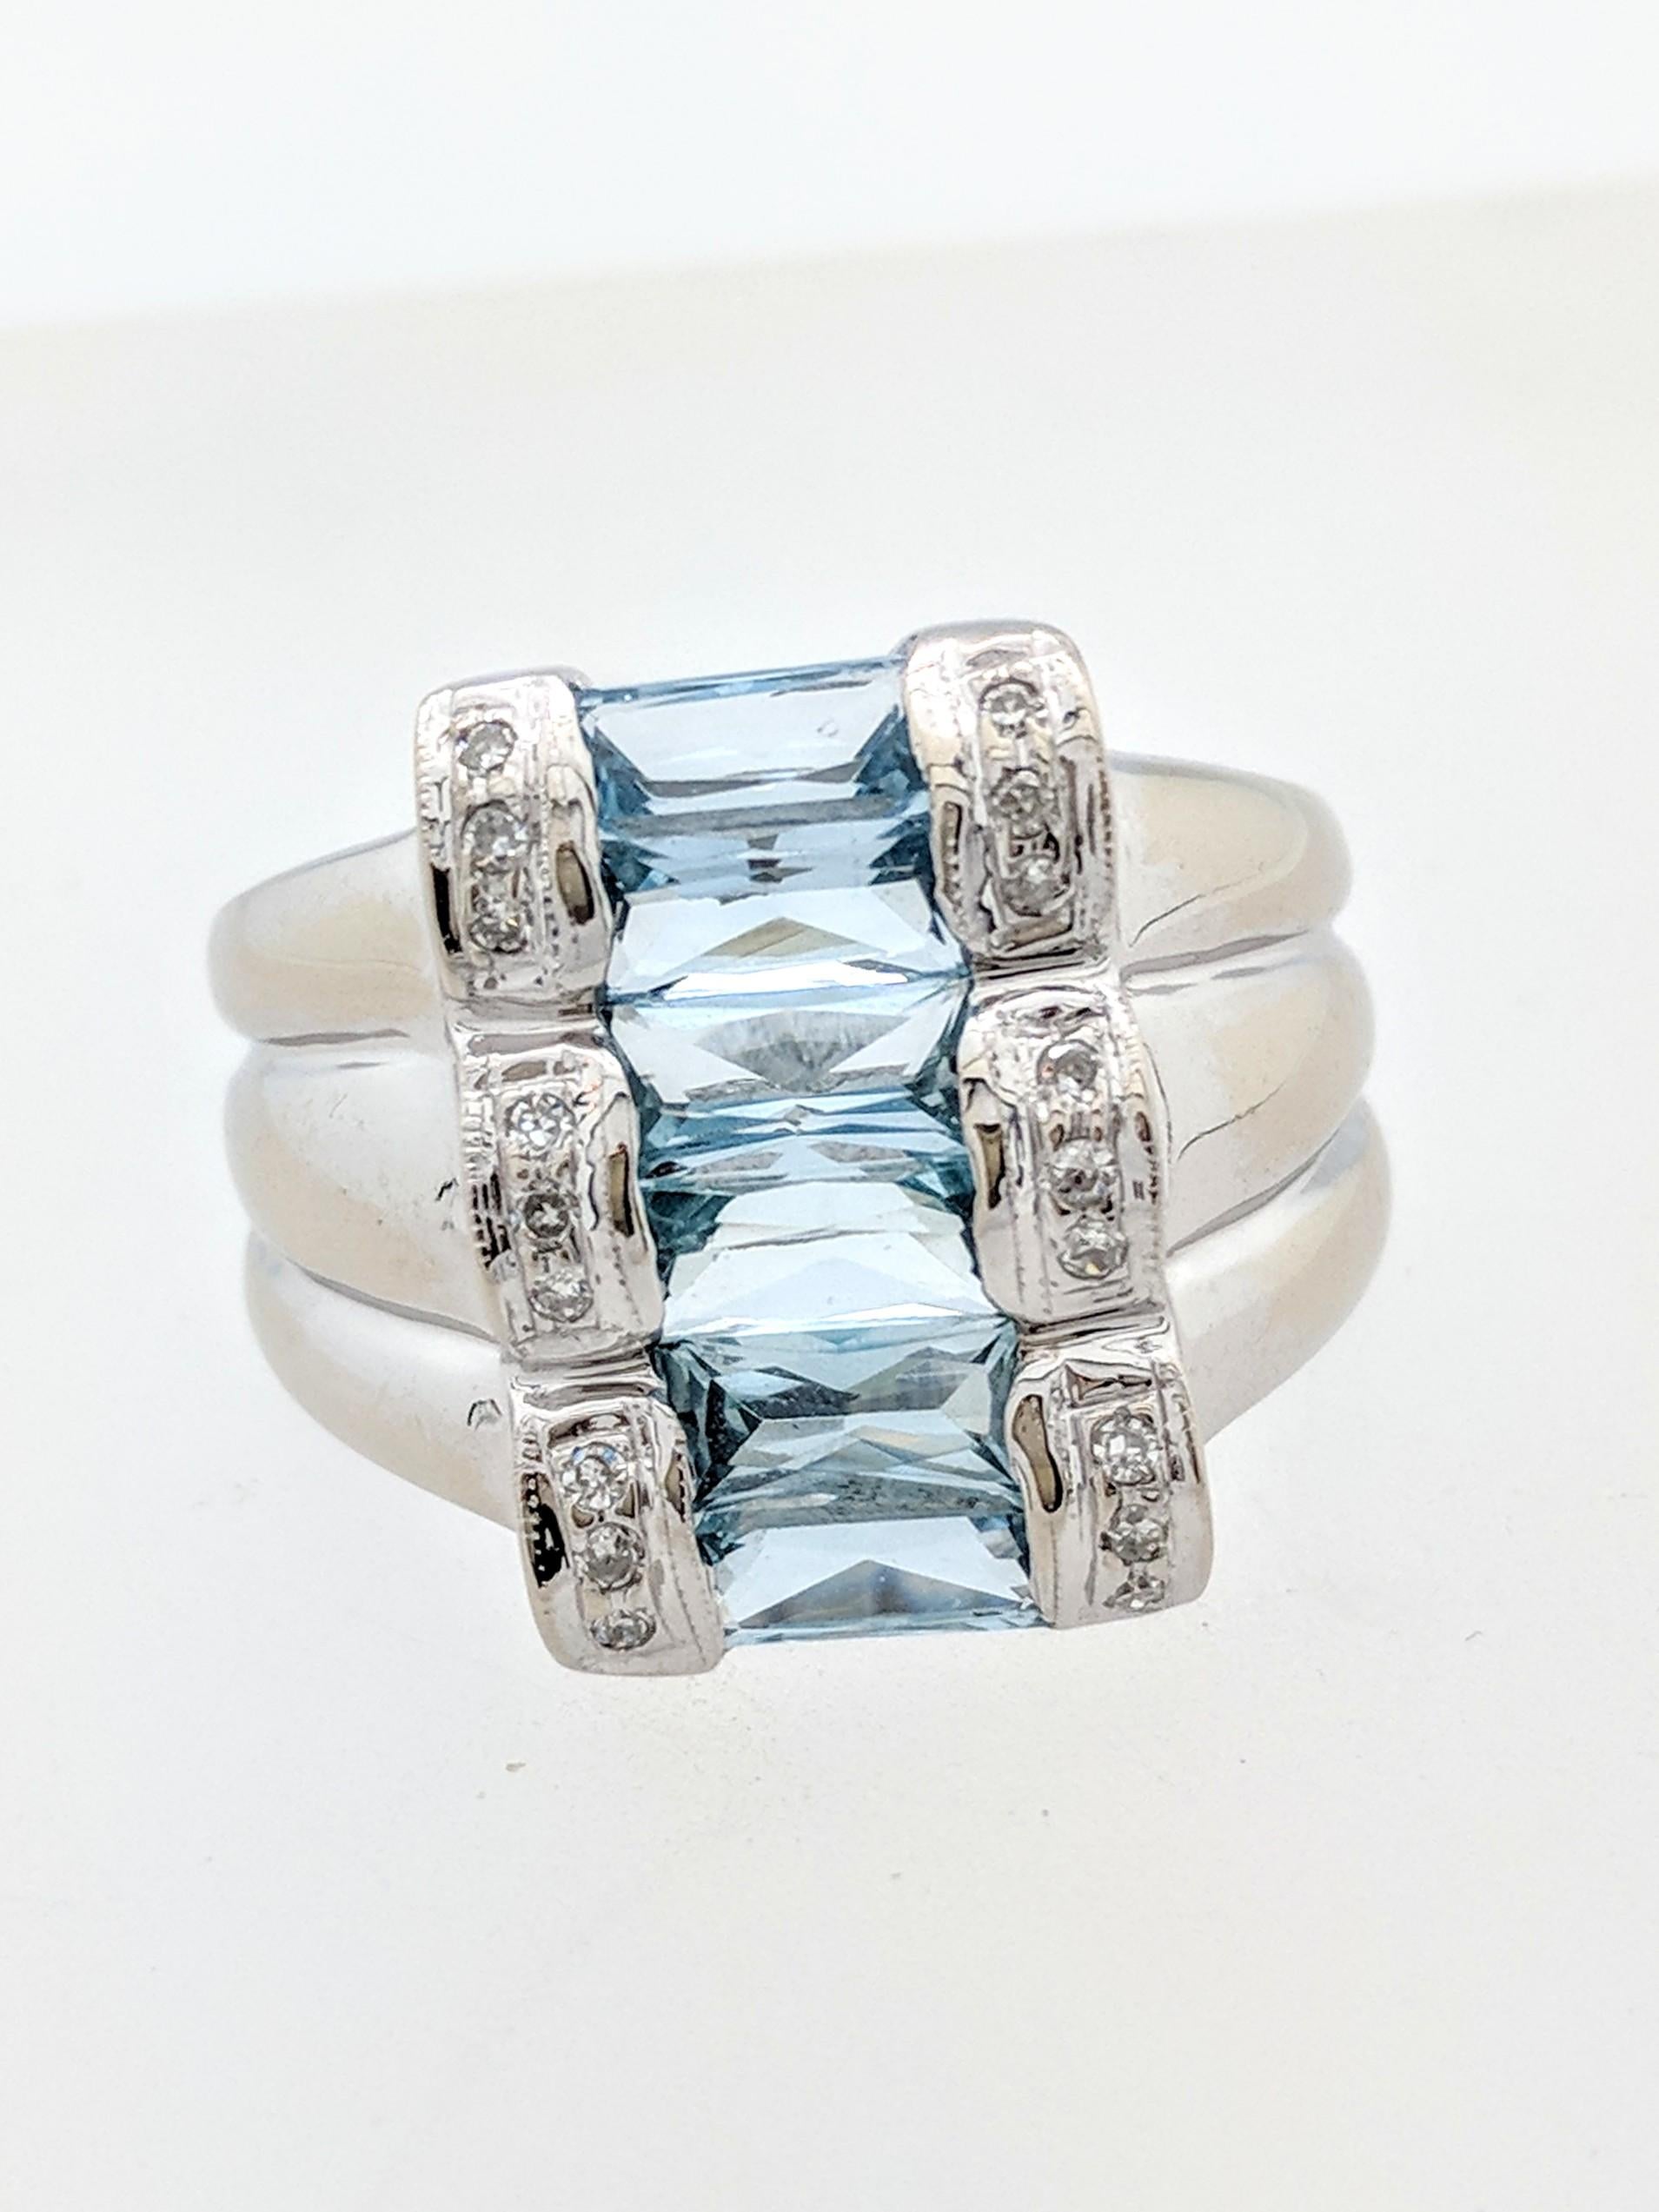 You are viewing a uniquely designed aquamarine & diamond ring.  This ring is crafted from 14k white gold and weighs 6.2 grams.  It features (6) sideways baguette shaped aquamarines and (18) .01ct natural round diamonds. Each aquamarine is